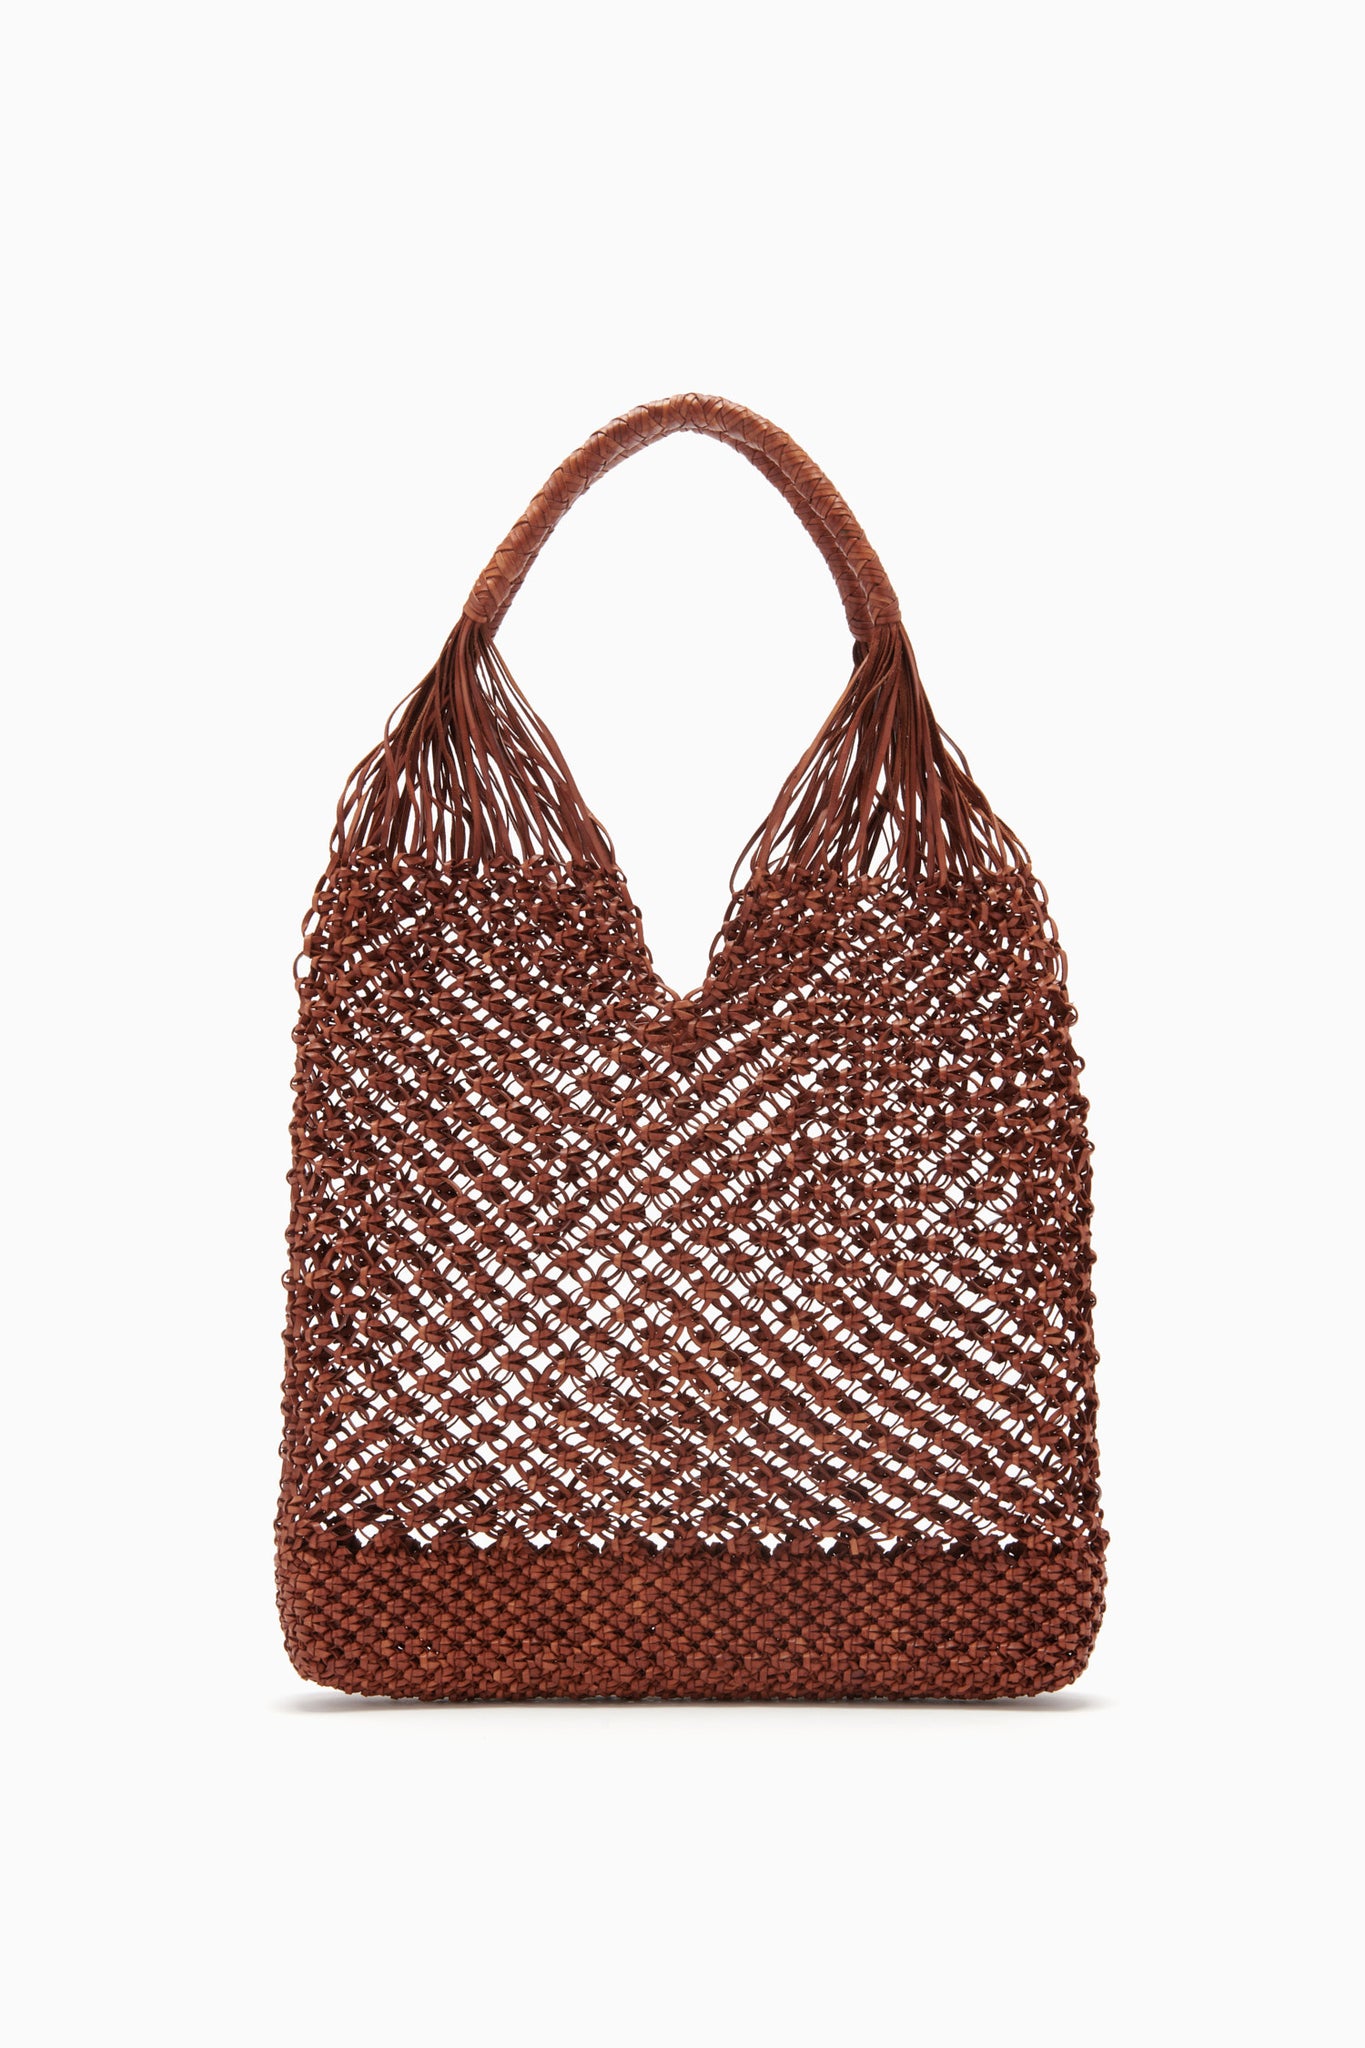 Tulia Large Knotted Hobo in Pecan Brown